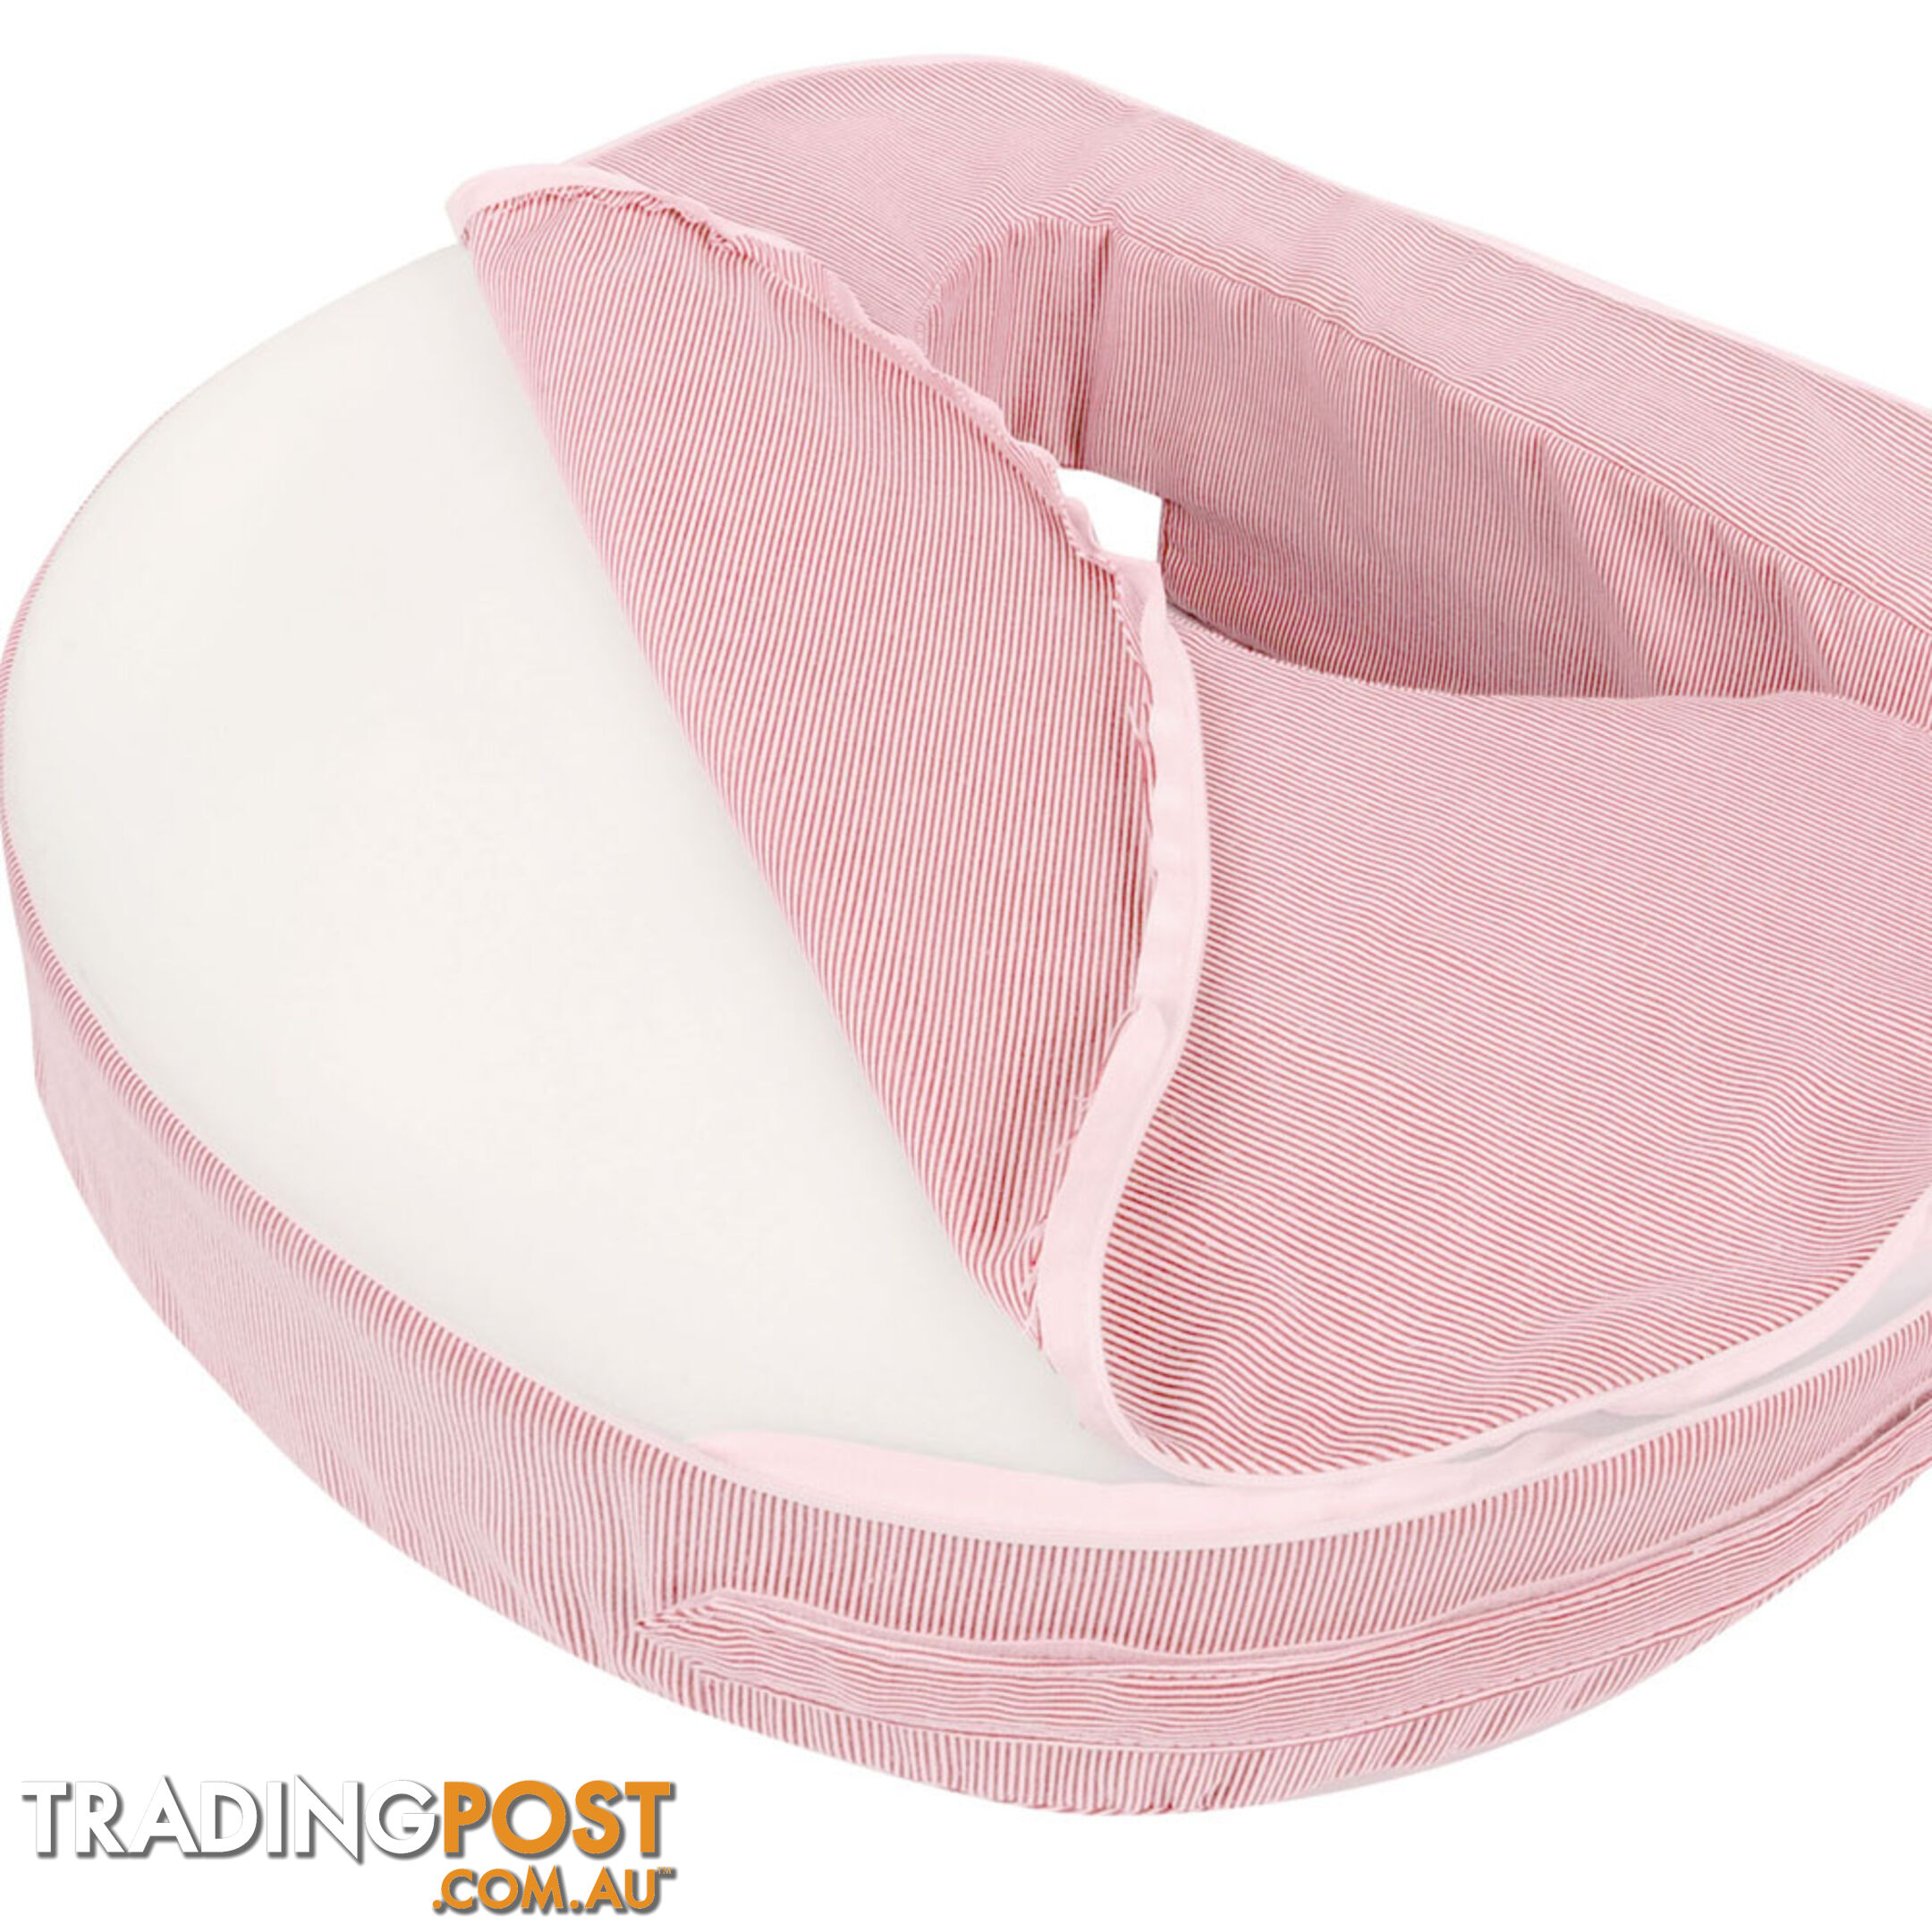 Baby Breast Feeding Support Memory Foam Breastfeeding Pillow Zip Cover Pink